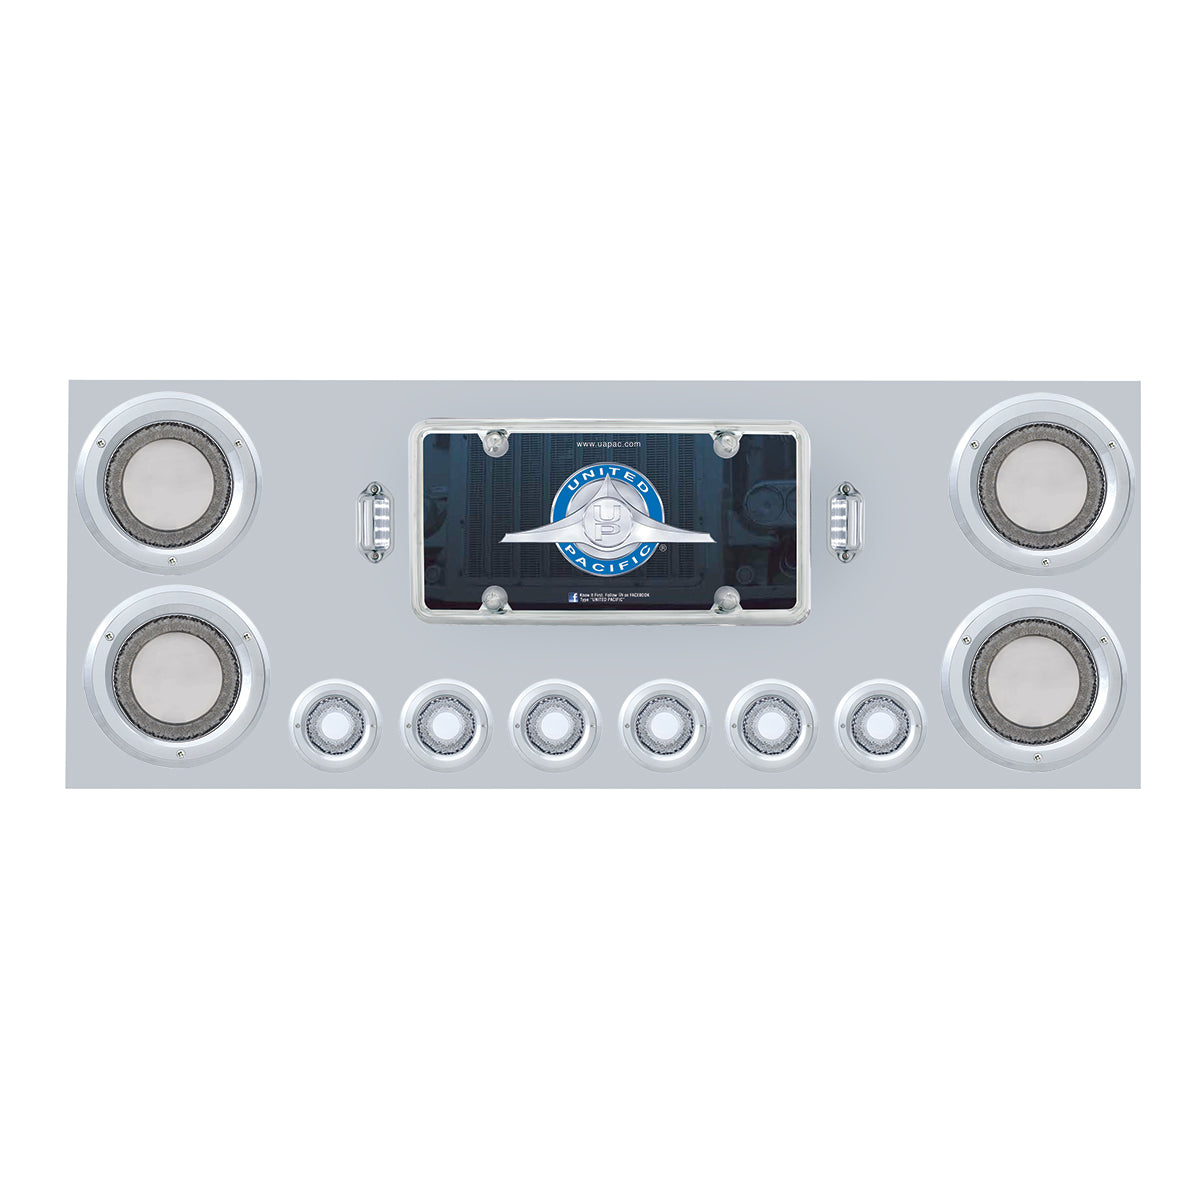 SS Rear Center Panel w/ Four 23 LED 4